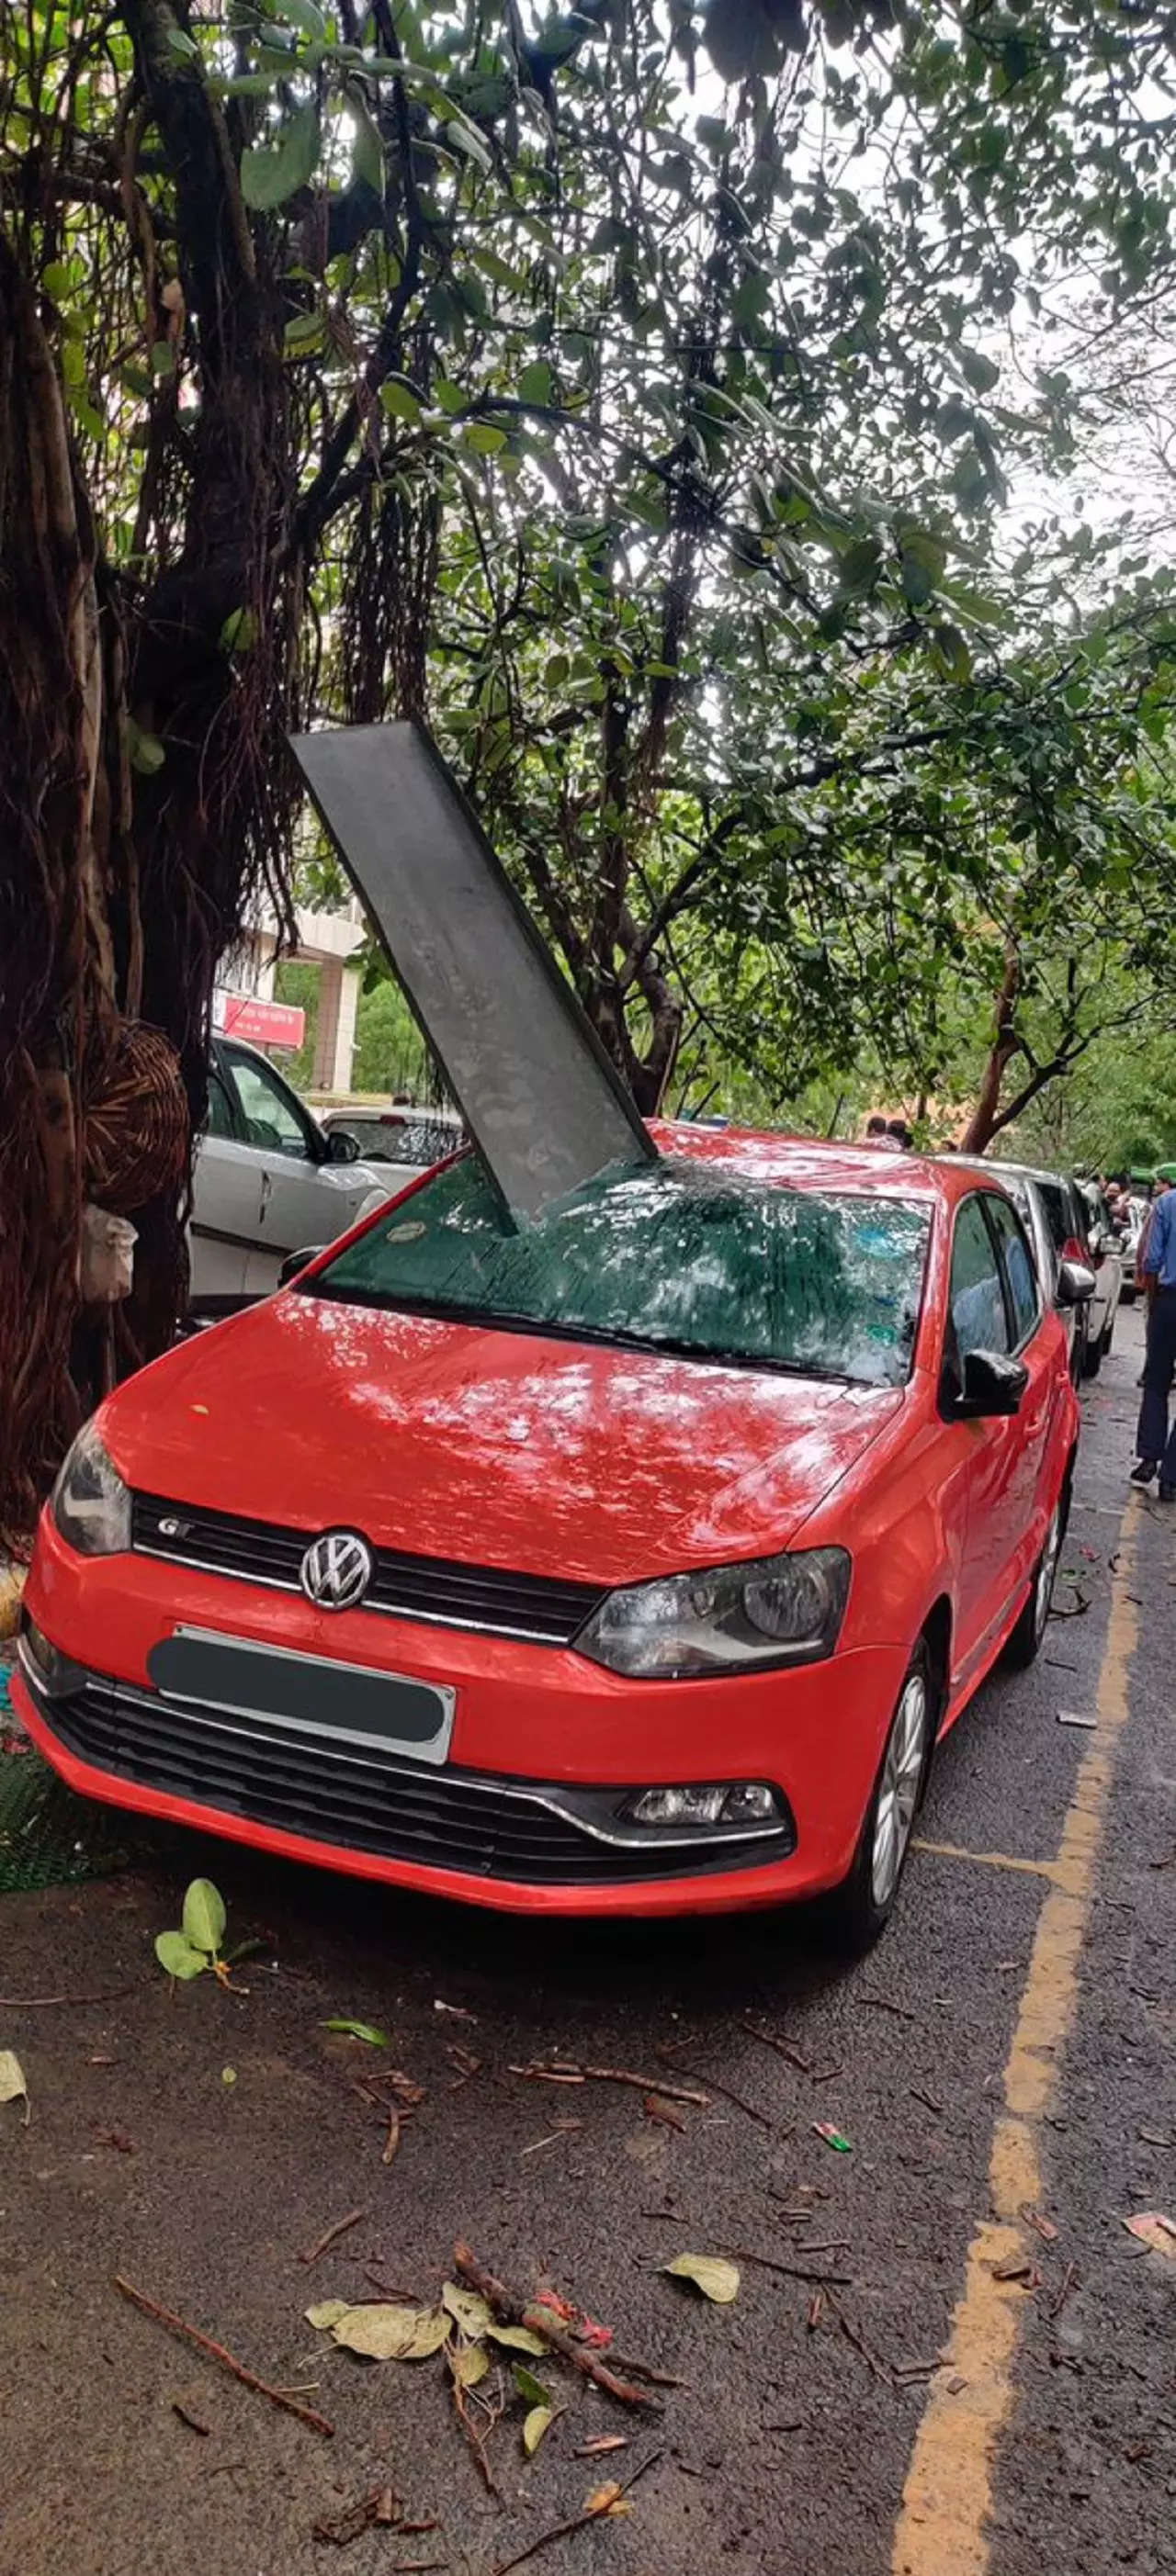 Metal object pierces car in the aftermath of Delhi rains